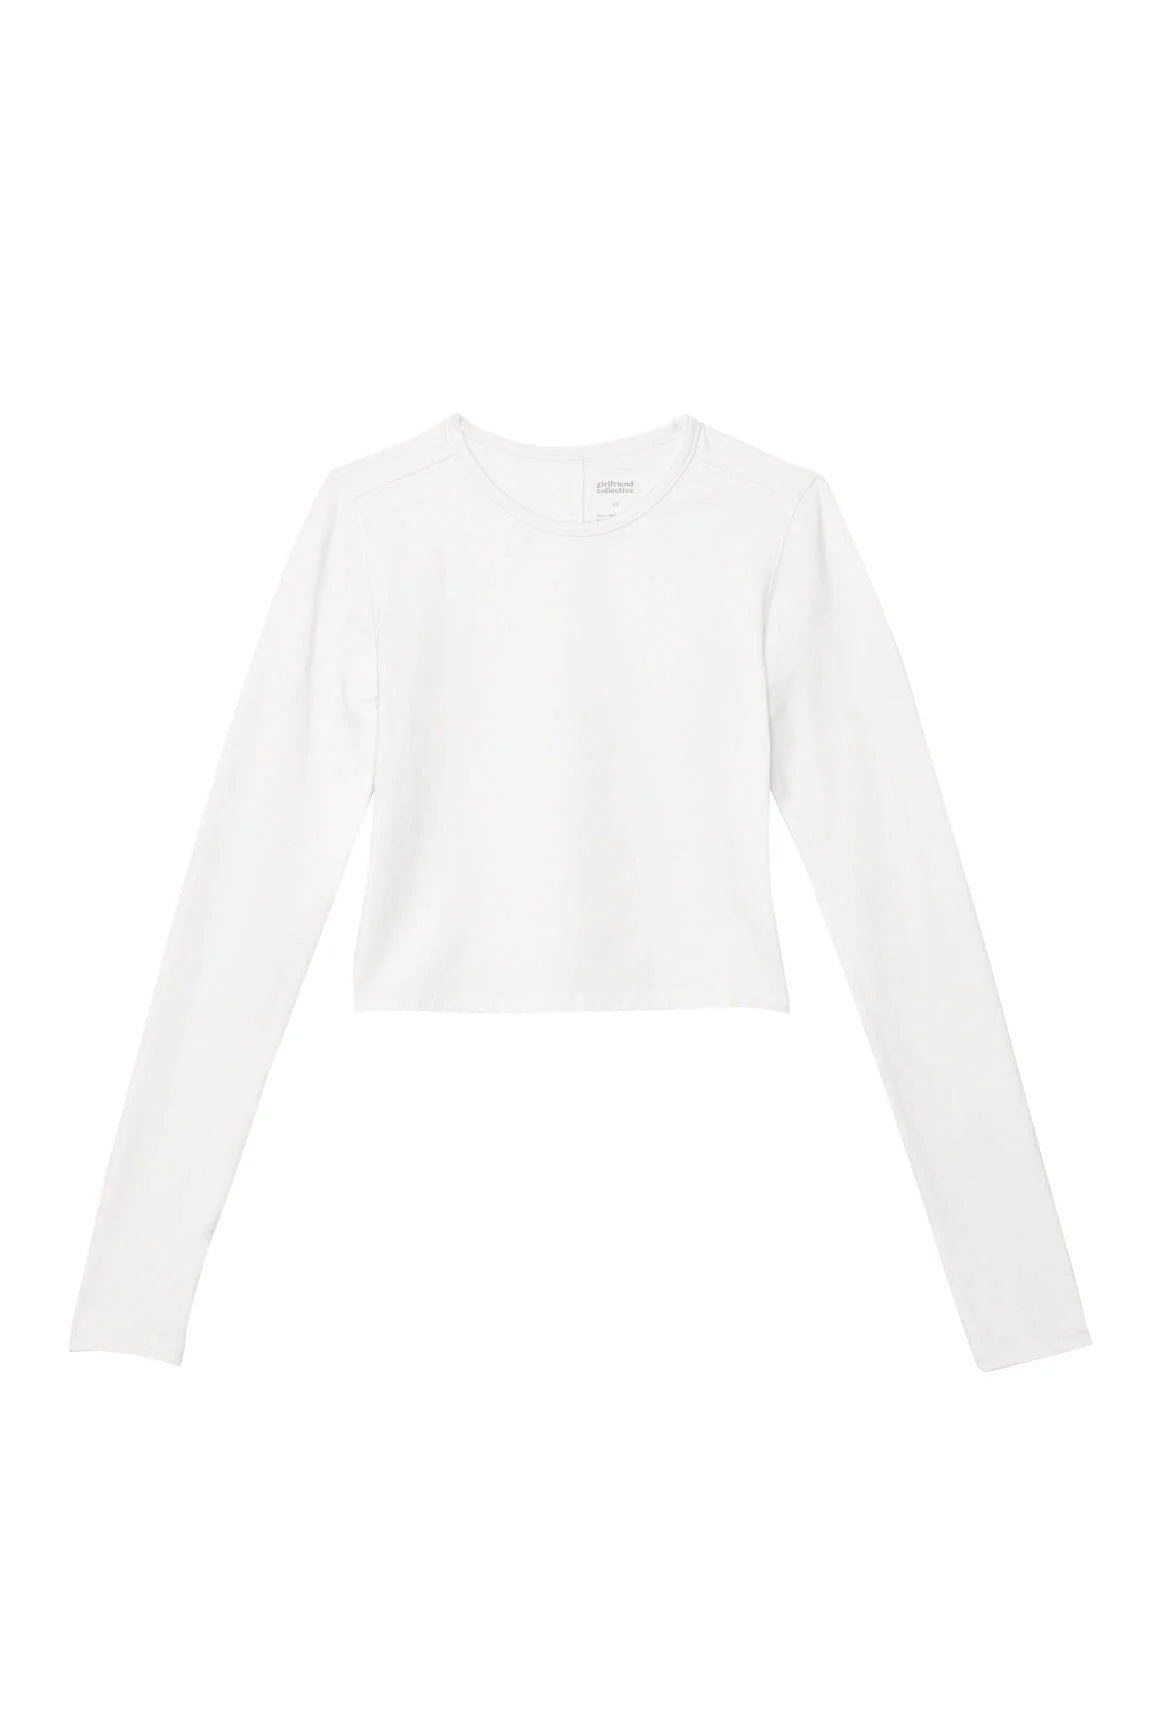 Reset Cropped Long Sleeve Tee - White